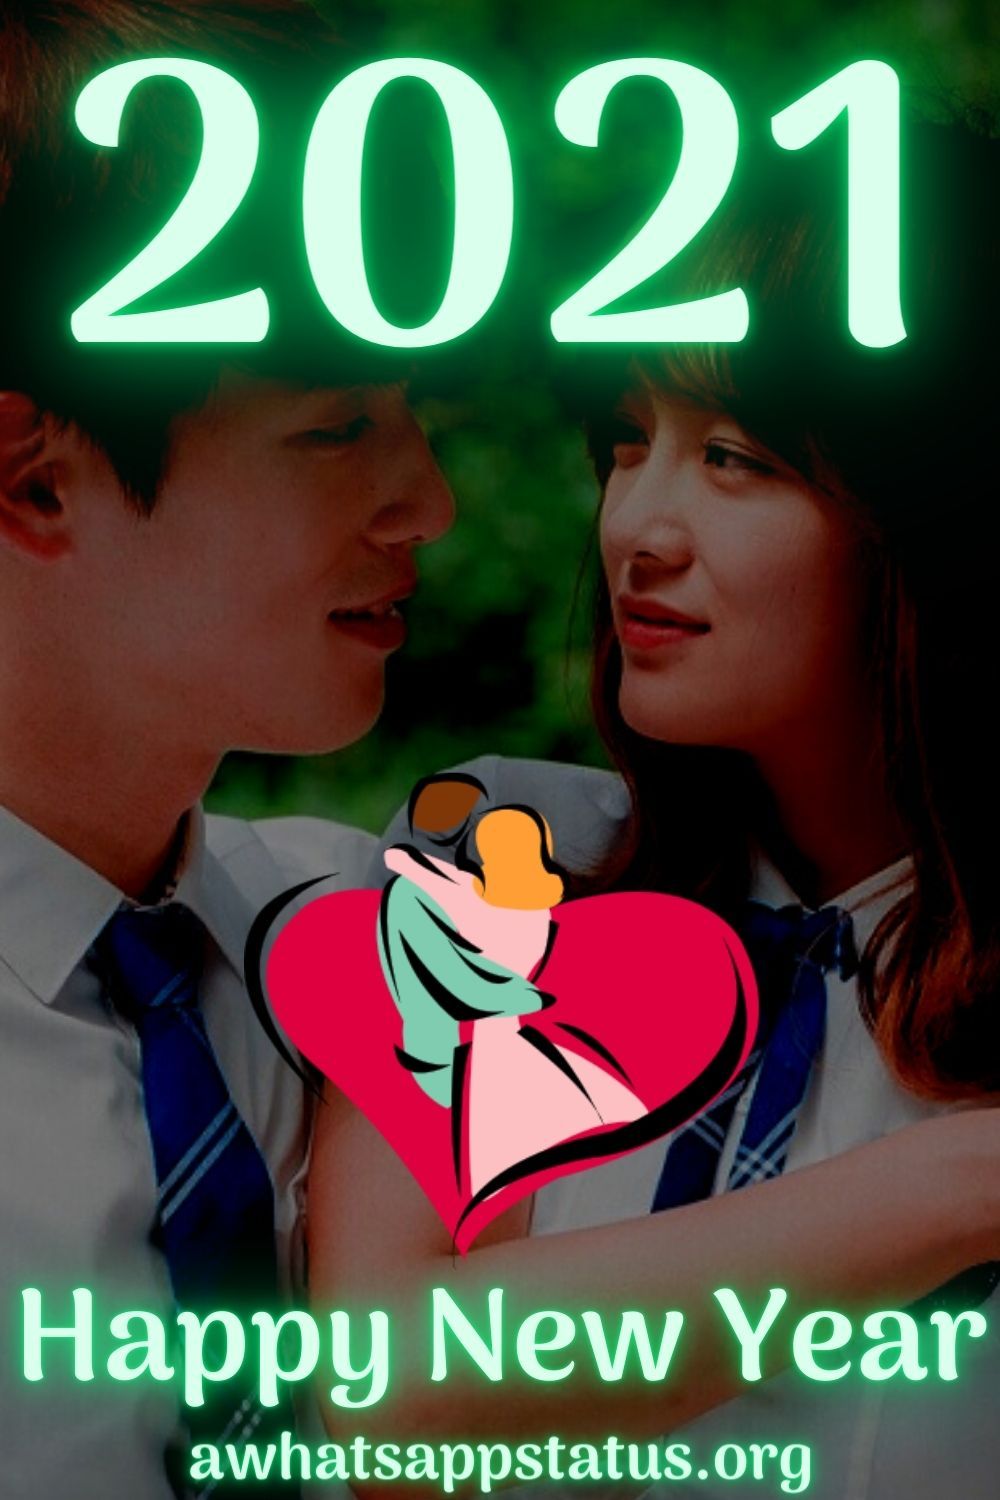 Happy New Year Wallpaper Cute Couple Background With